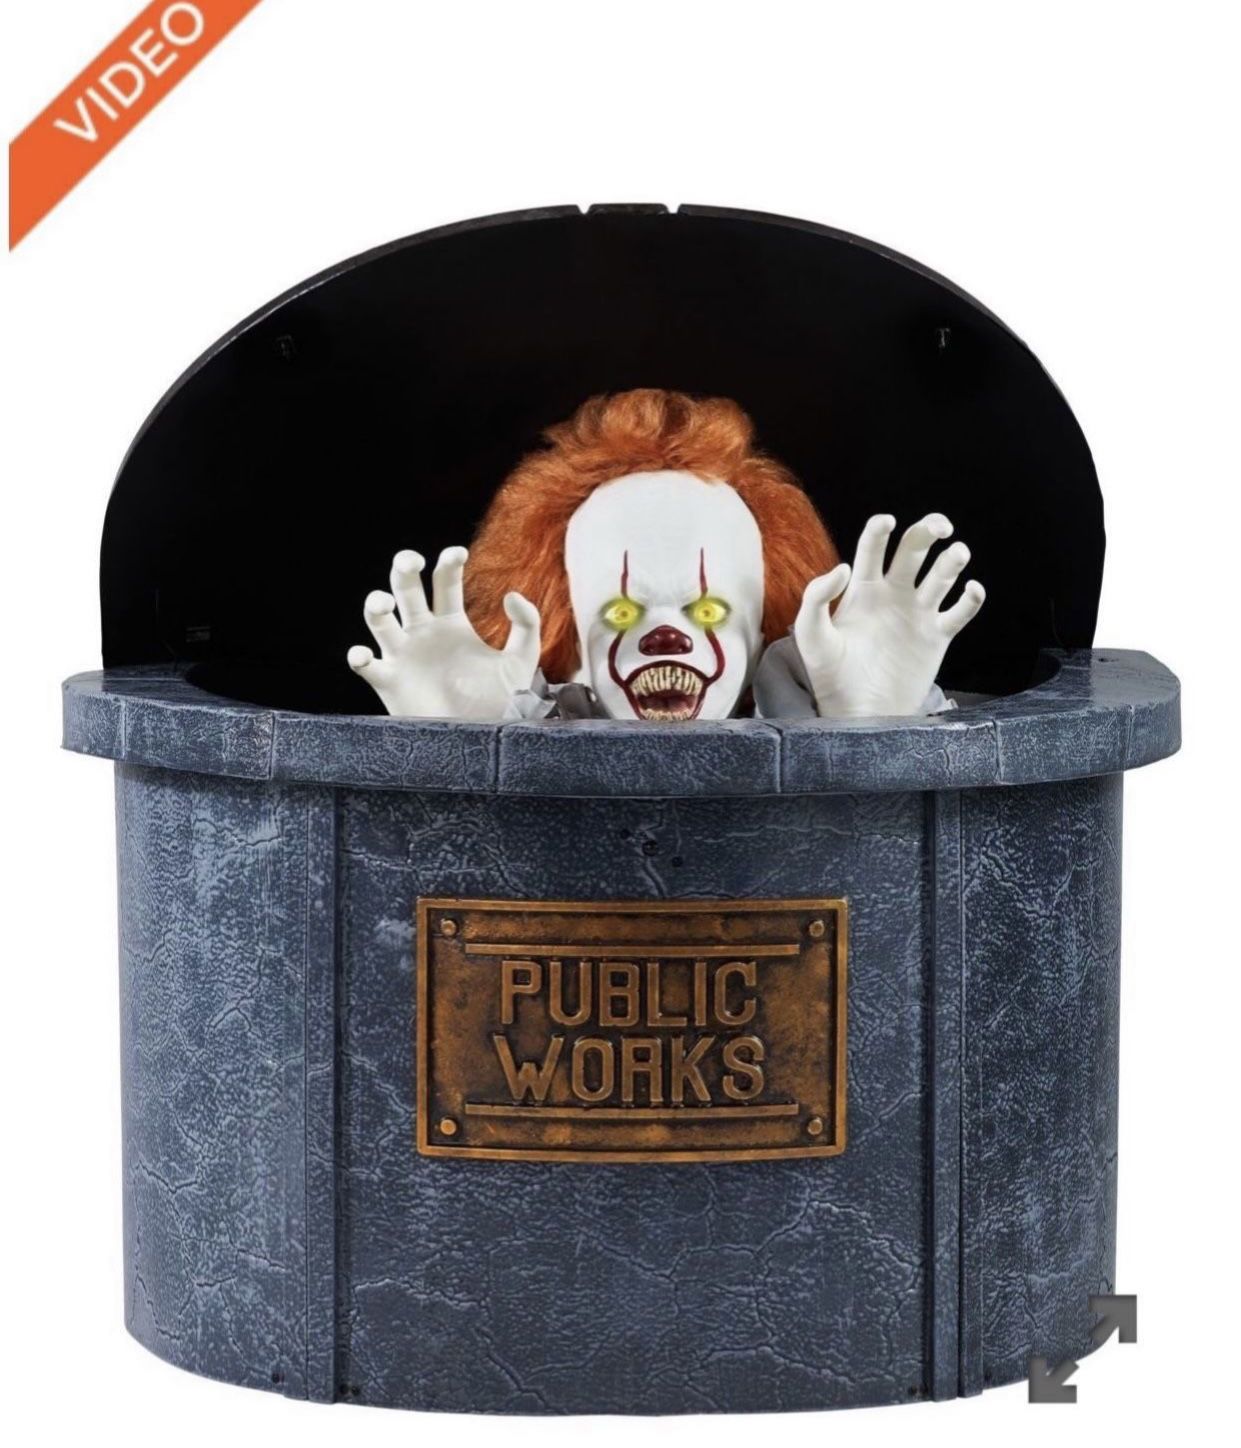 Halloween IT Pennywise Sewer Grate Animatronic 